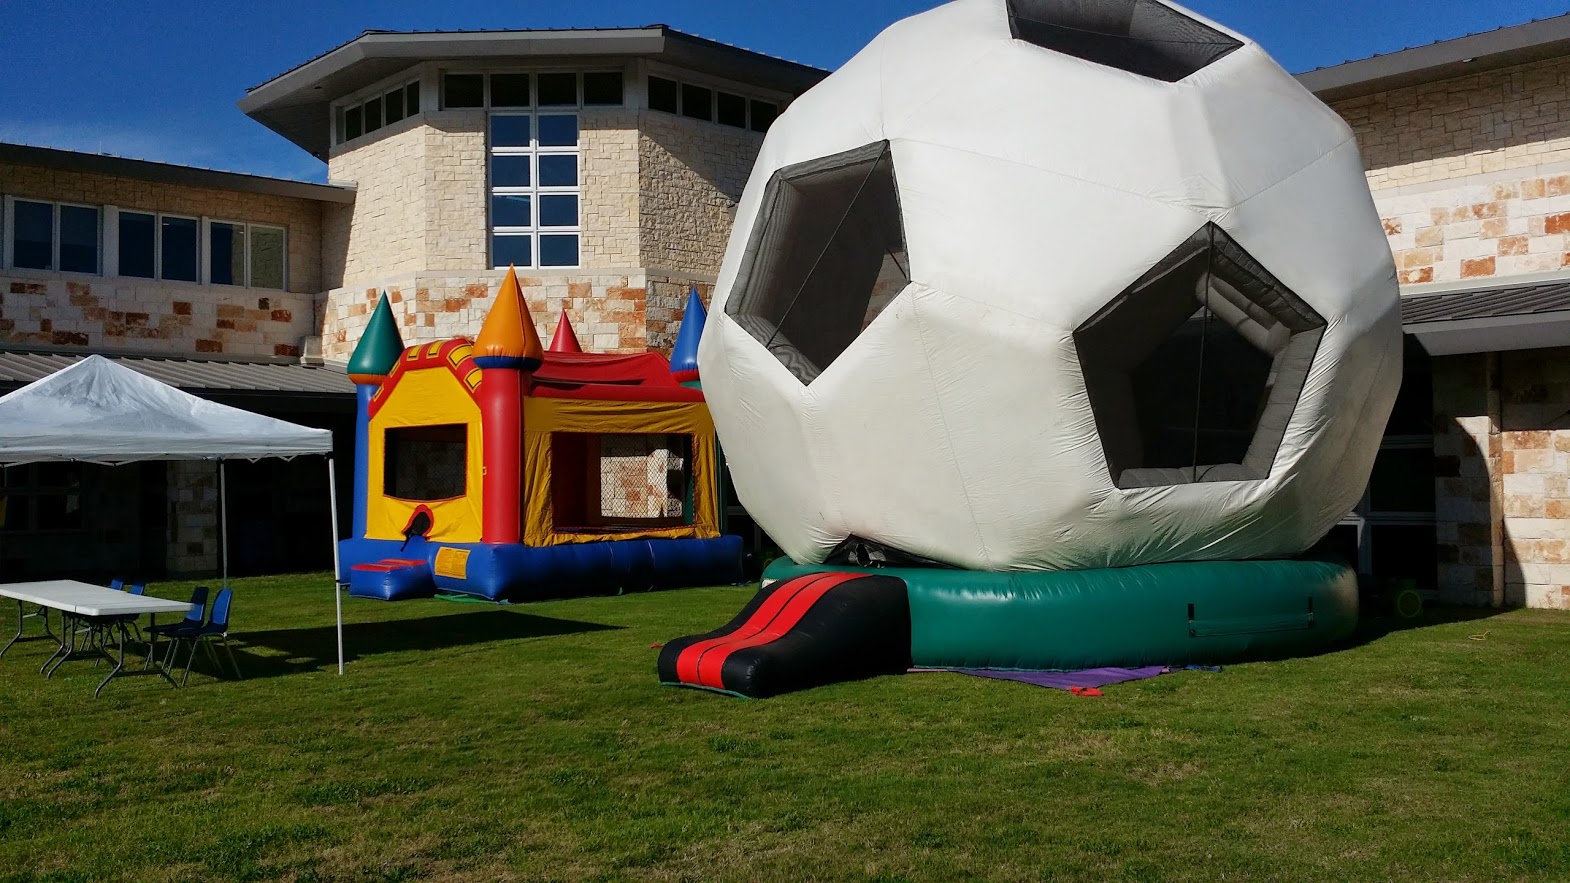 Fun Times Party Rental Bounce House Rentals And Slides For Parties In Wylie - reserving your roblox bounce house